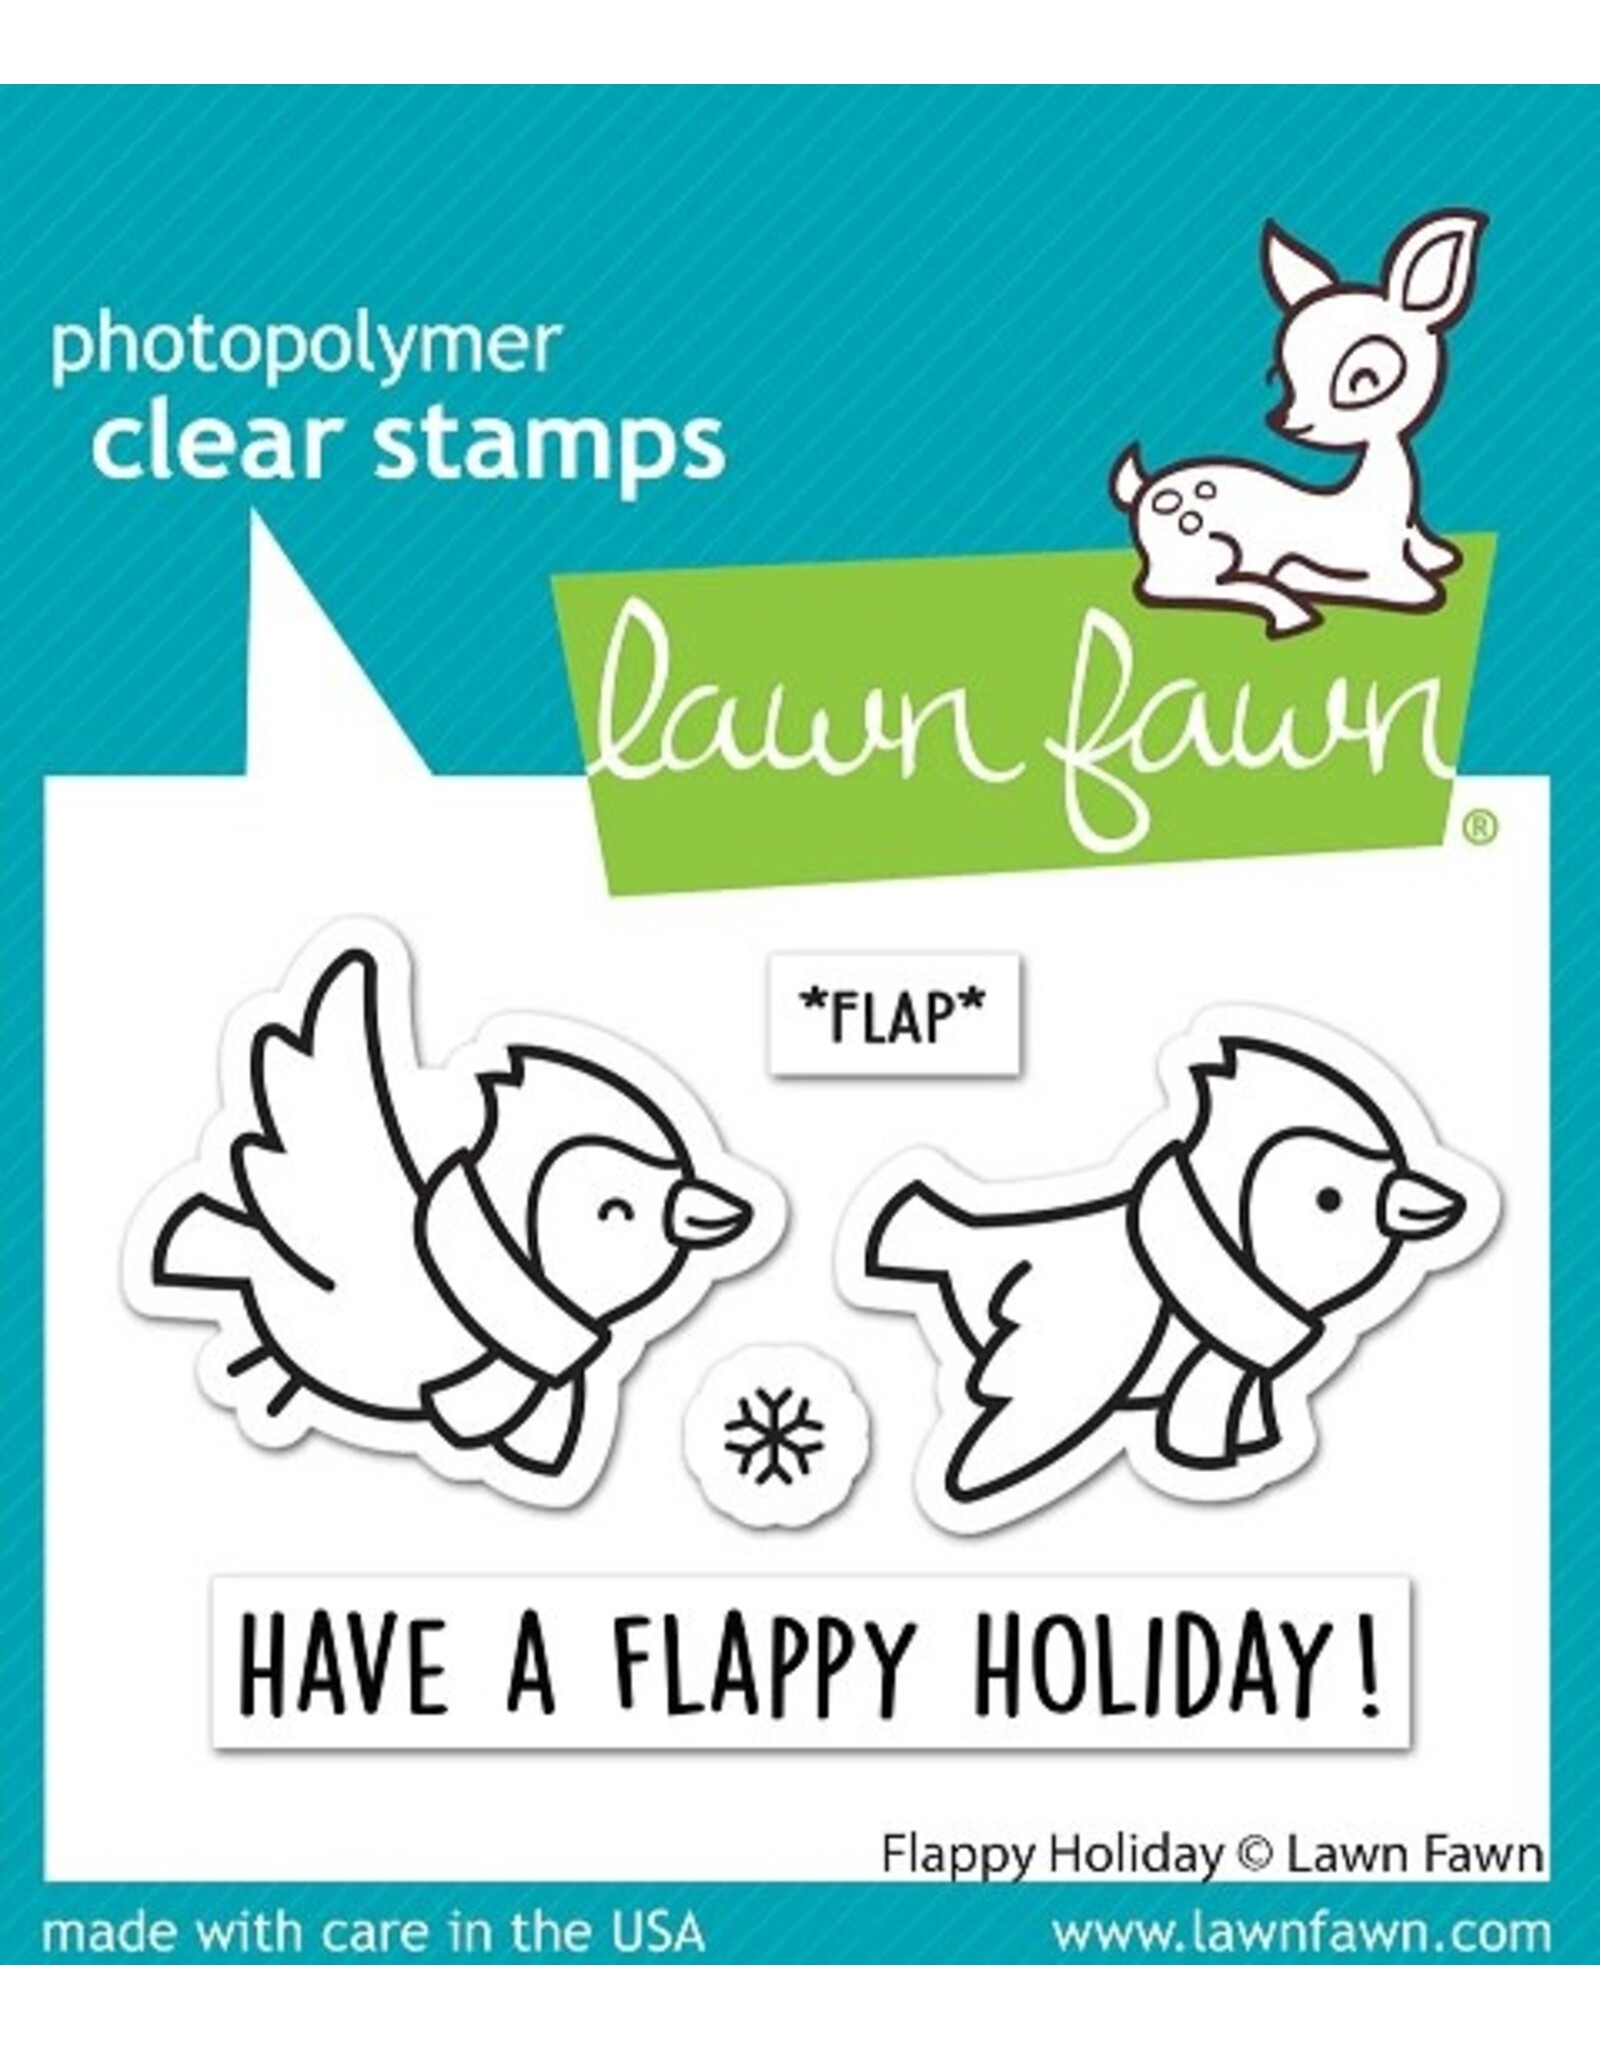 Lawn Fawn Flappy Holiday - Clear Stamps